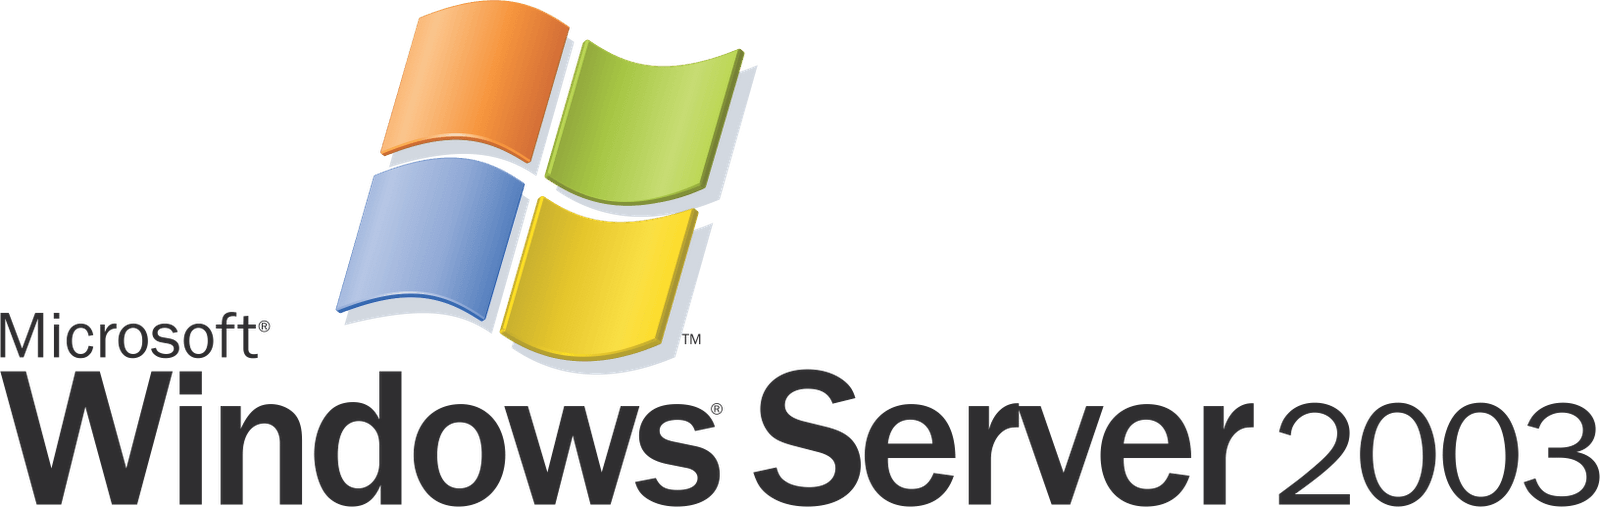 Microsoft Windows Server 2003 Logo - Windows Server 2003 support is ending July 14 AD Network Solutions